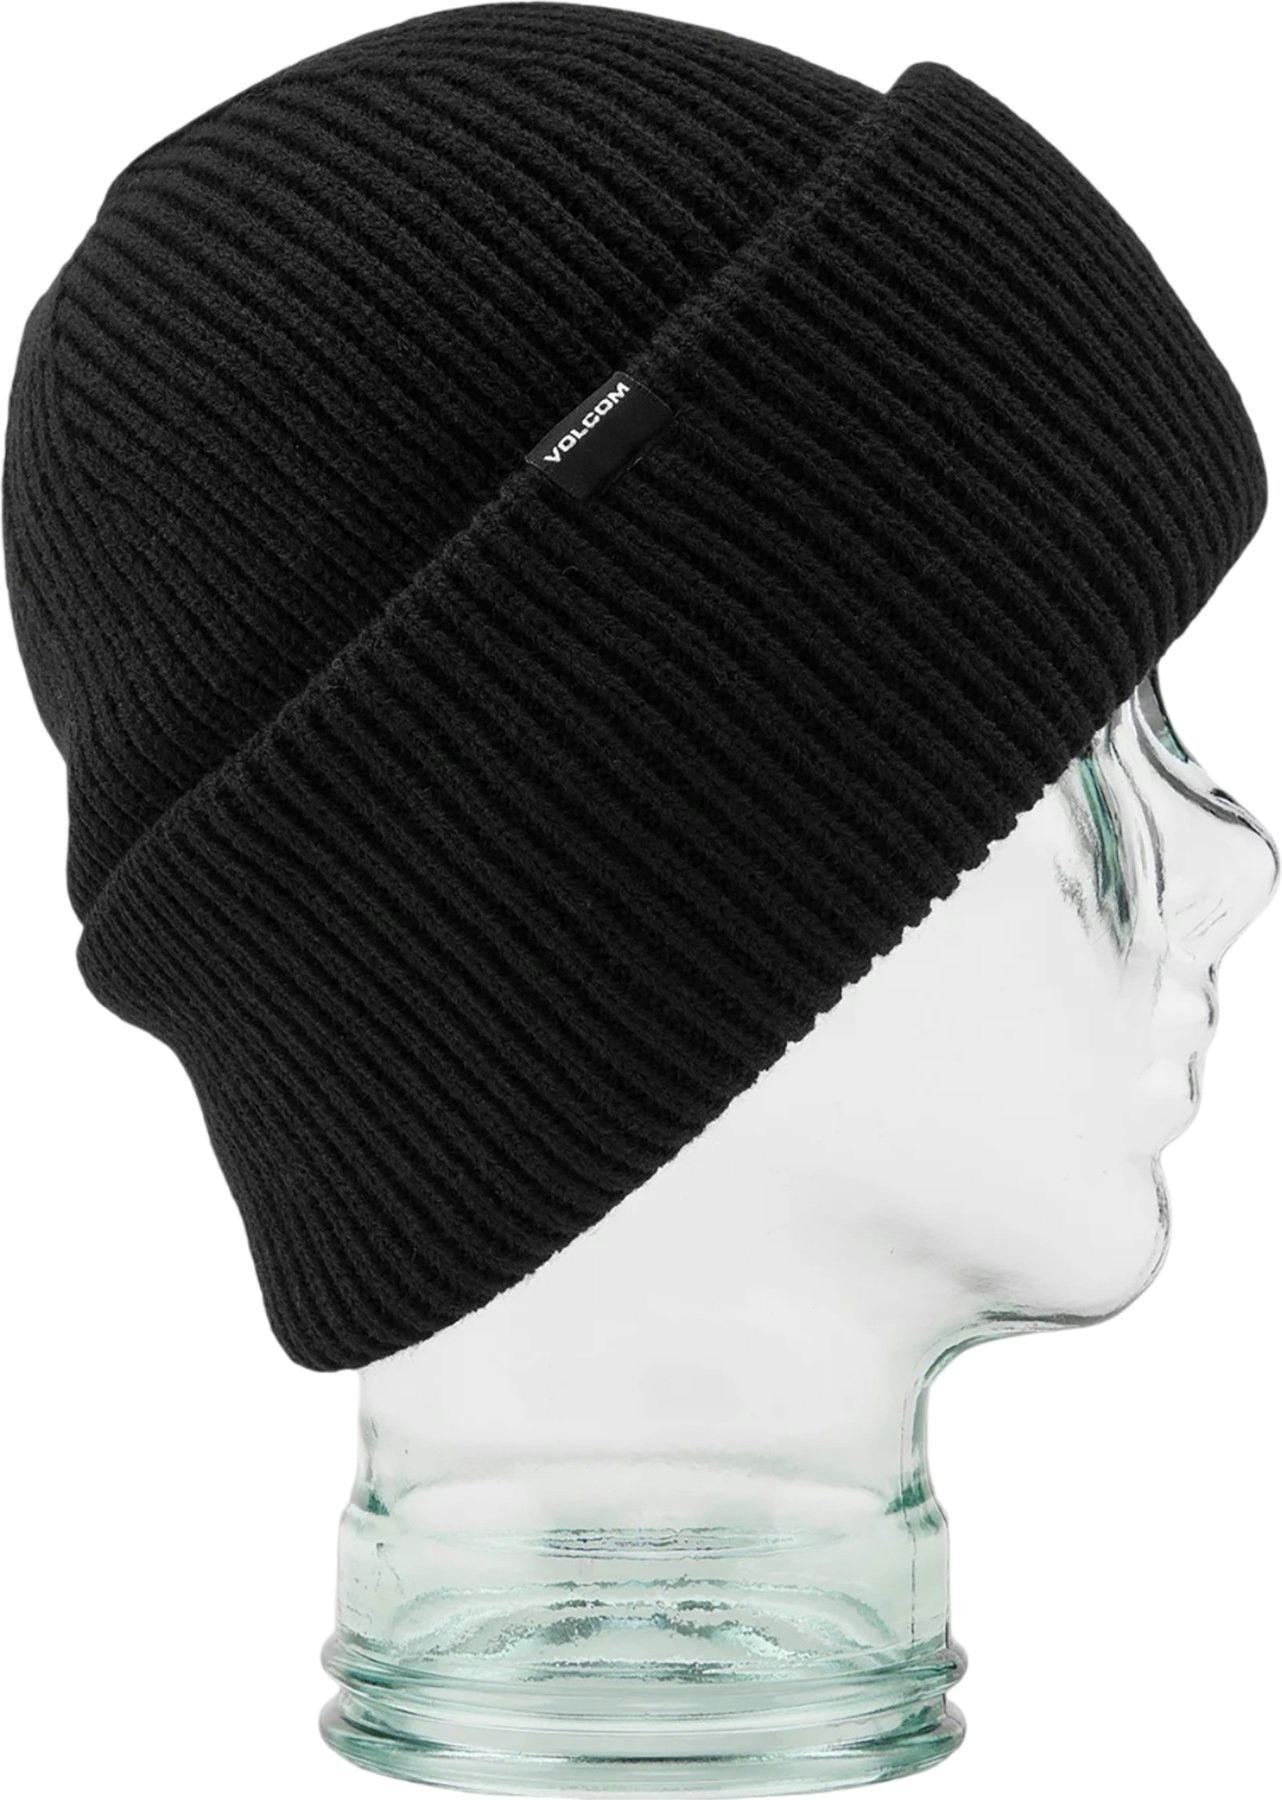 Product image for Roller Beanie - Men's